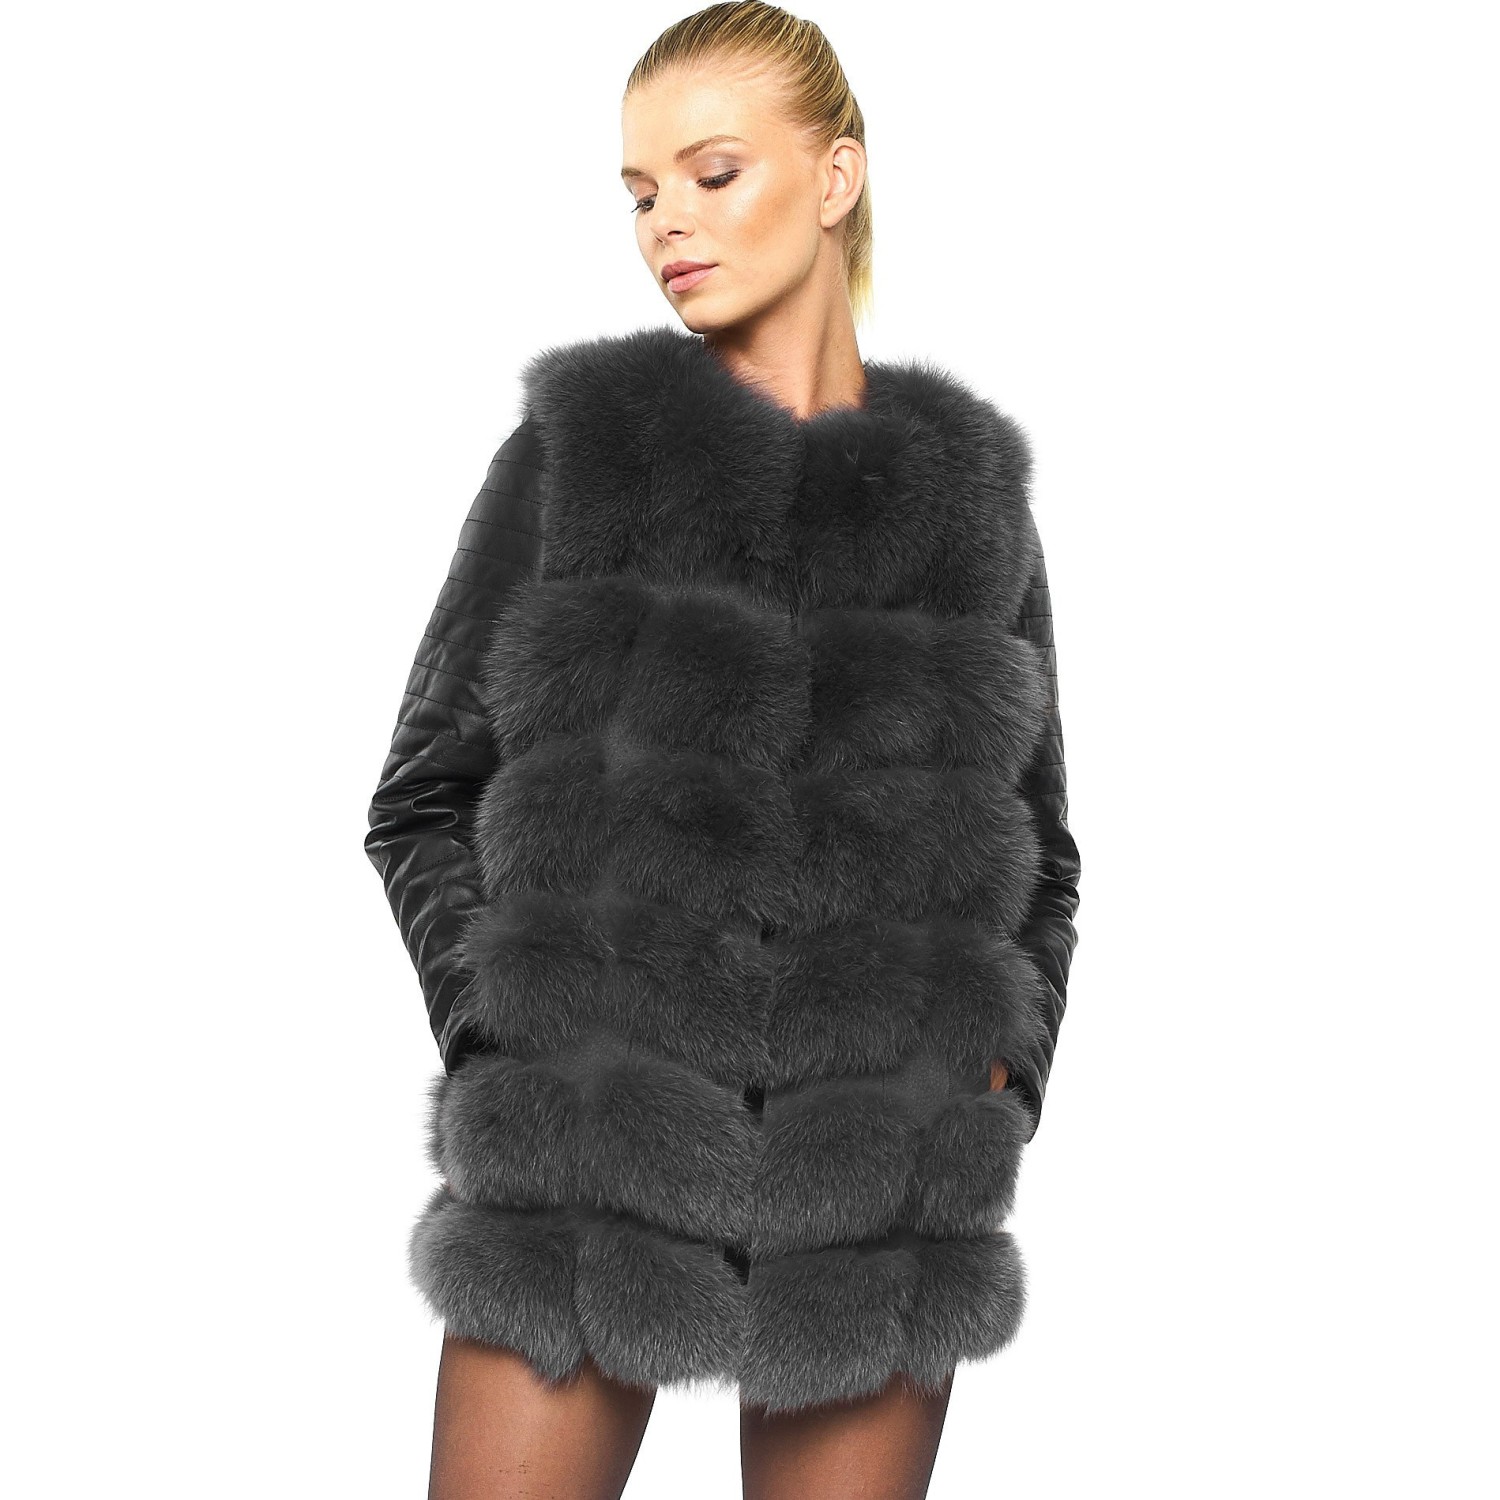 Real Fur Jacket with leather sleeves "VOGUE"